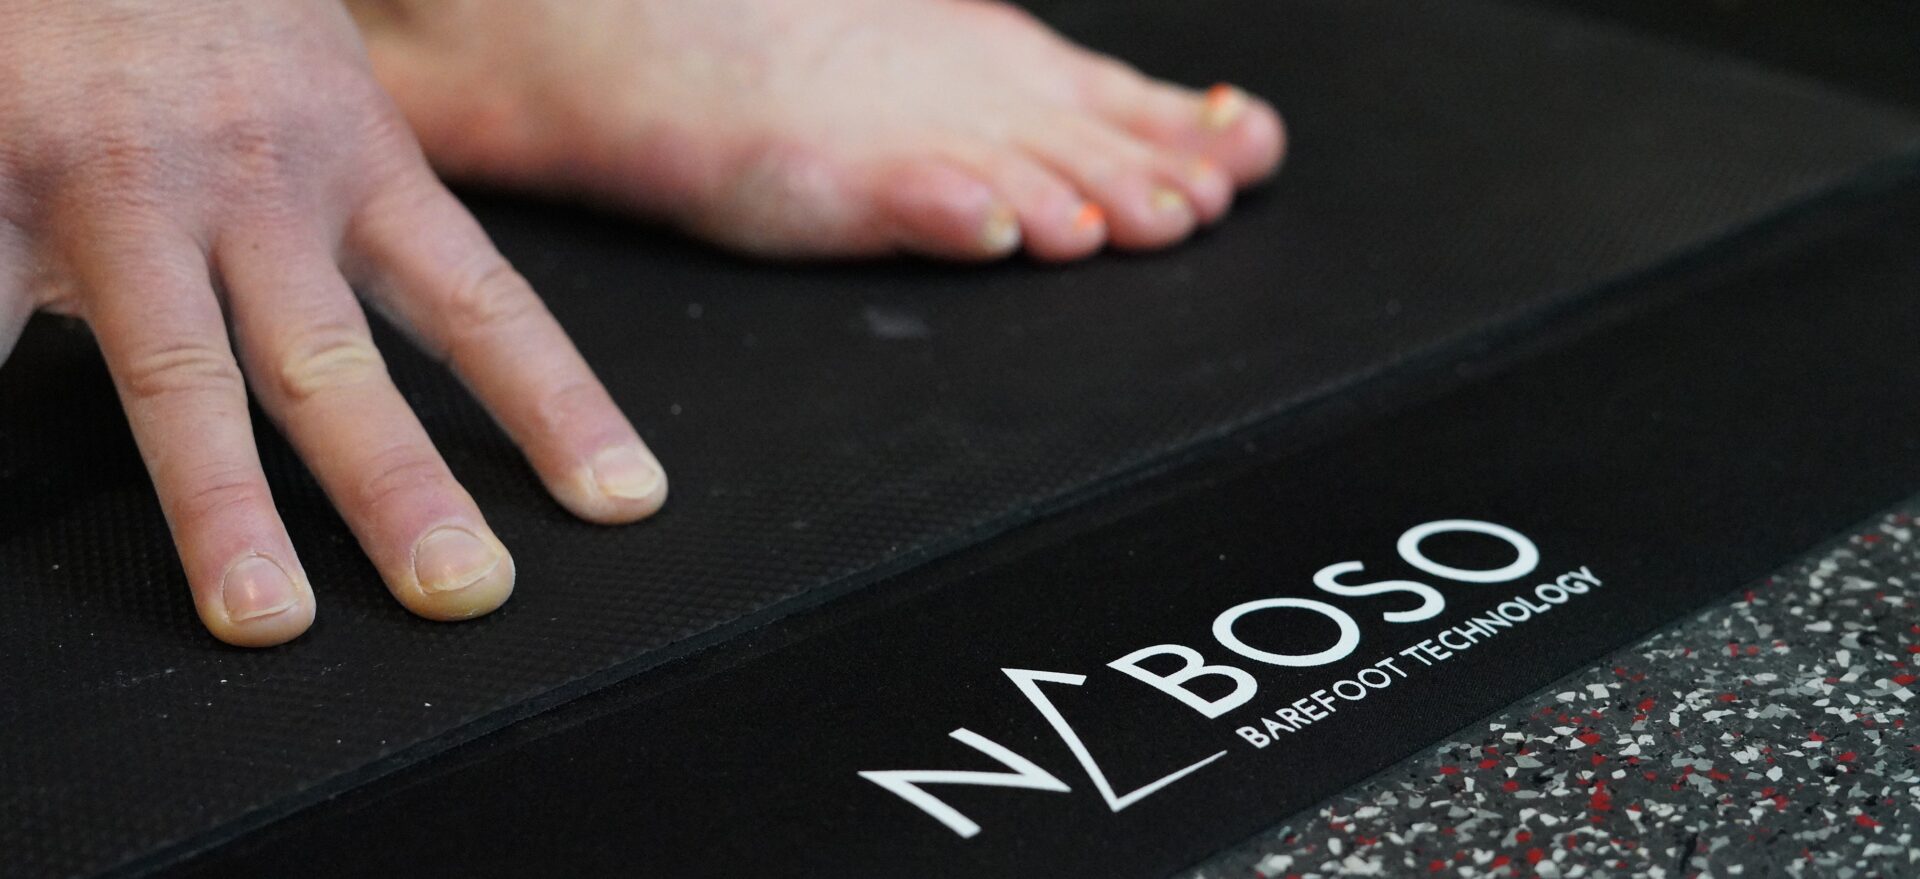 Enhance your Pilates practice with Naboso Technology